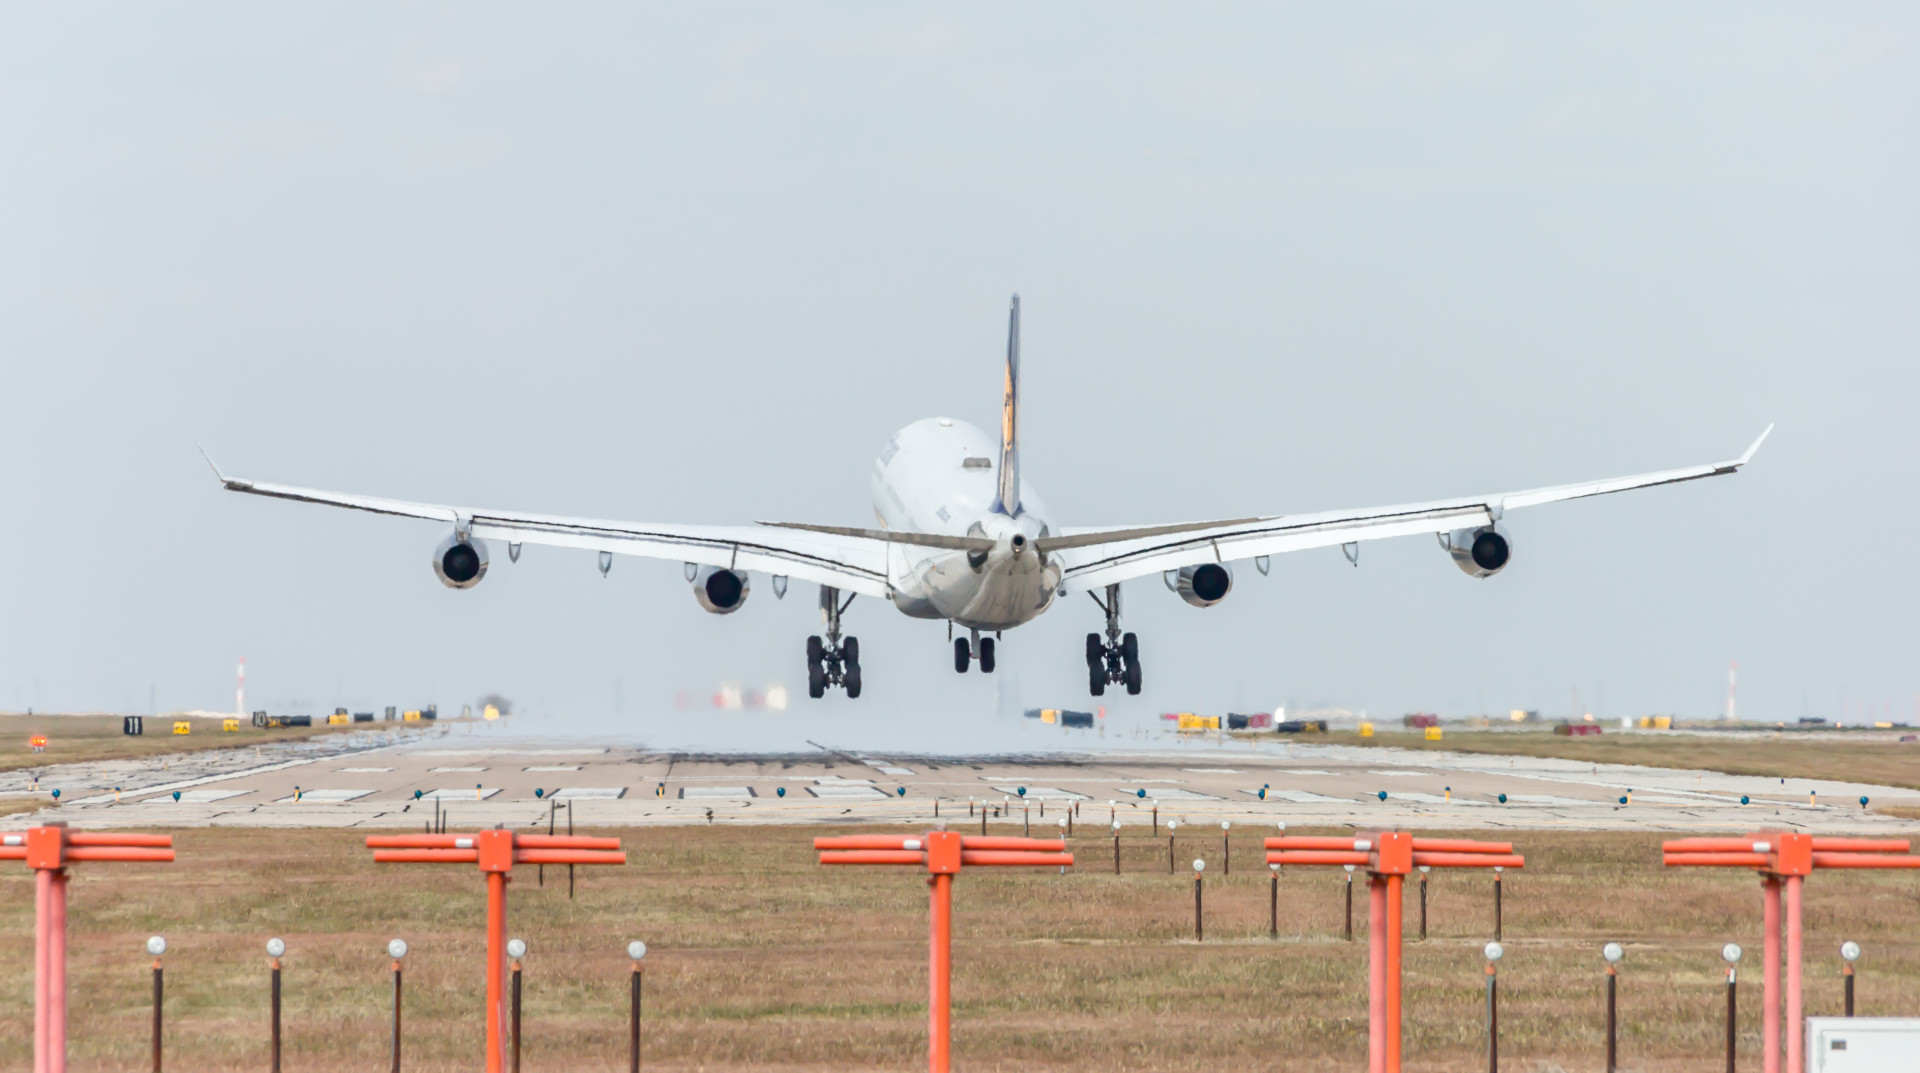 DFW Airport to rehabilitate runway as part of maintenance and upgrade programme